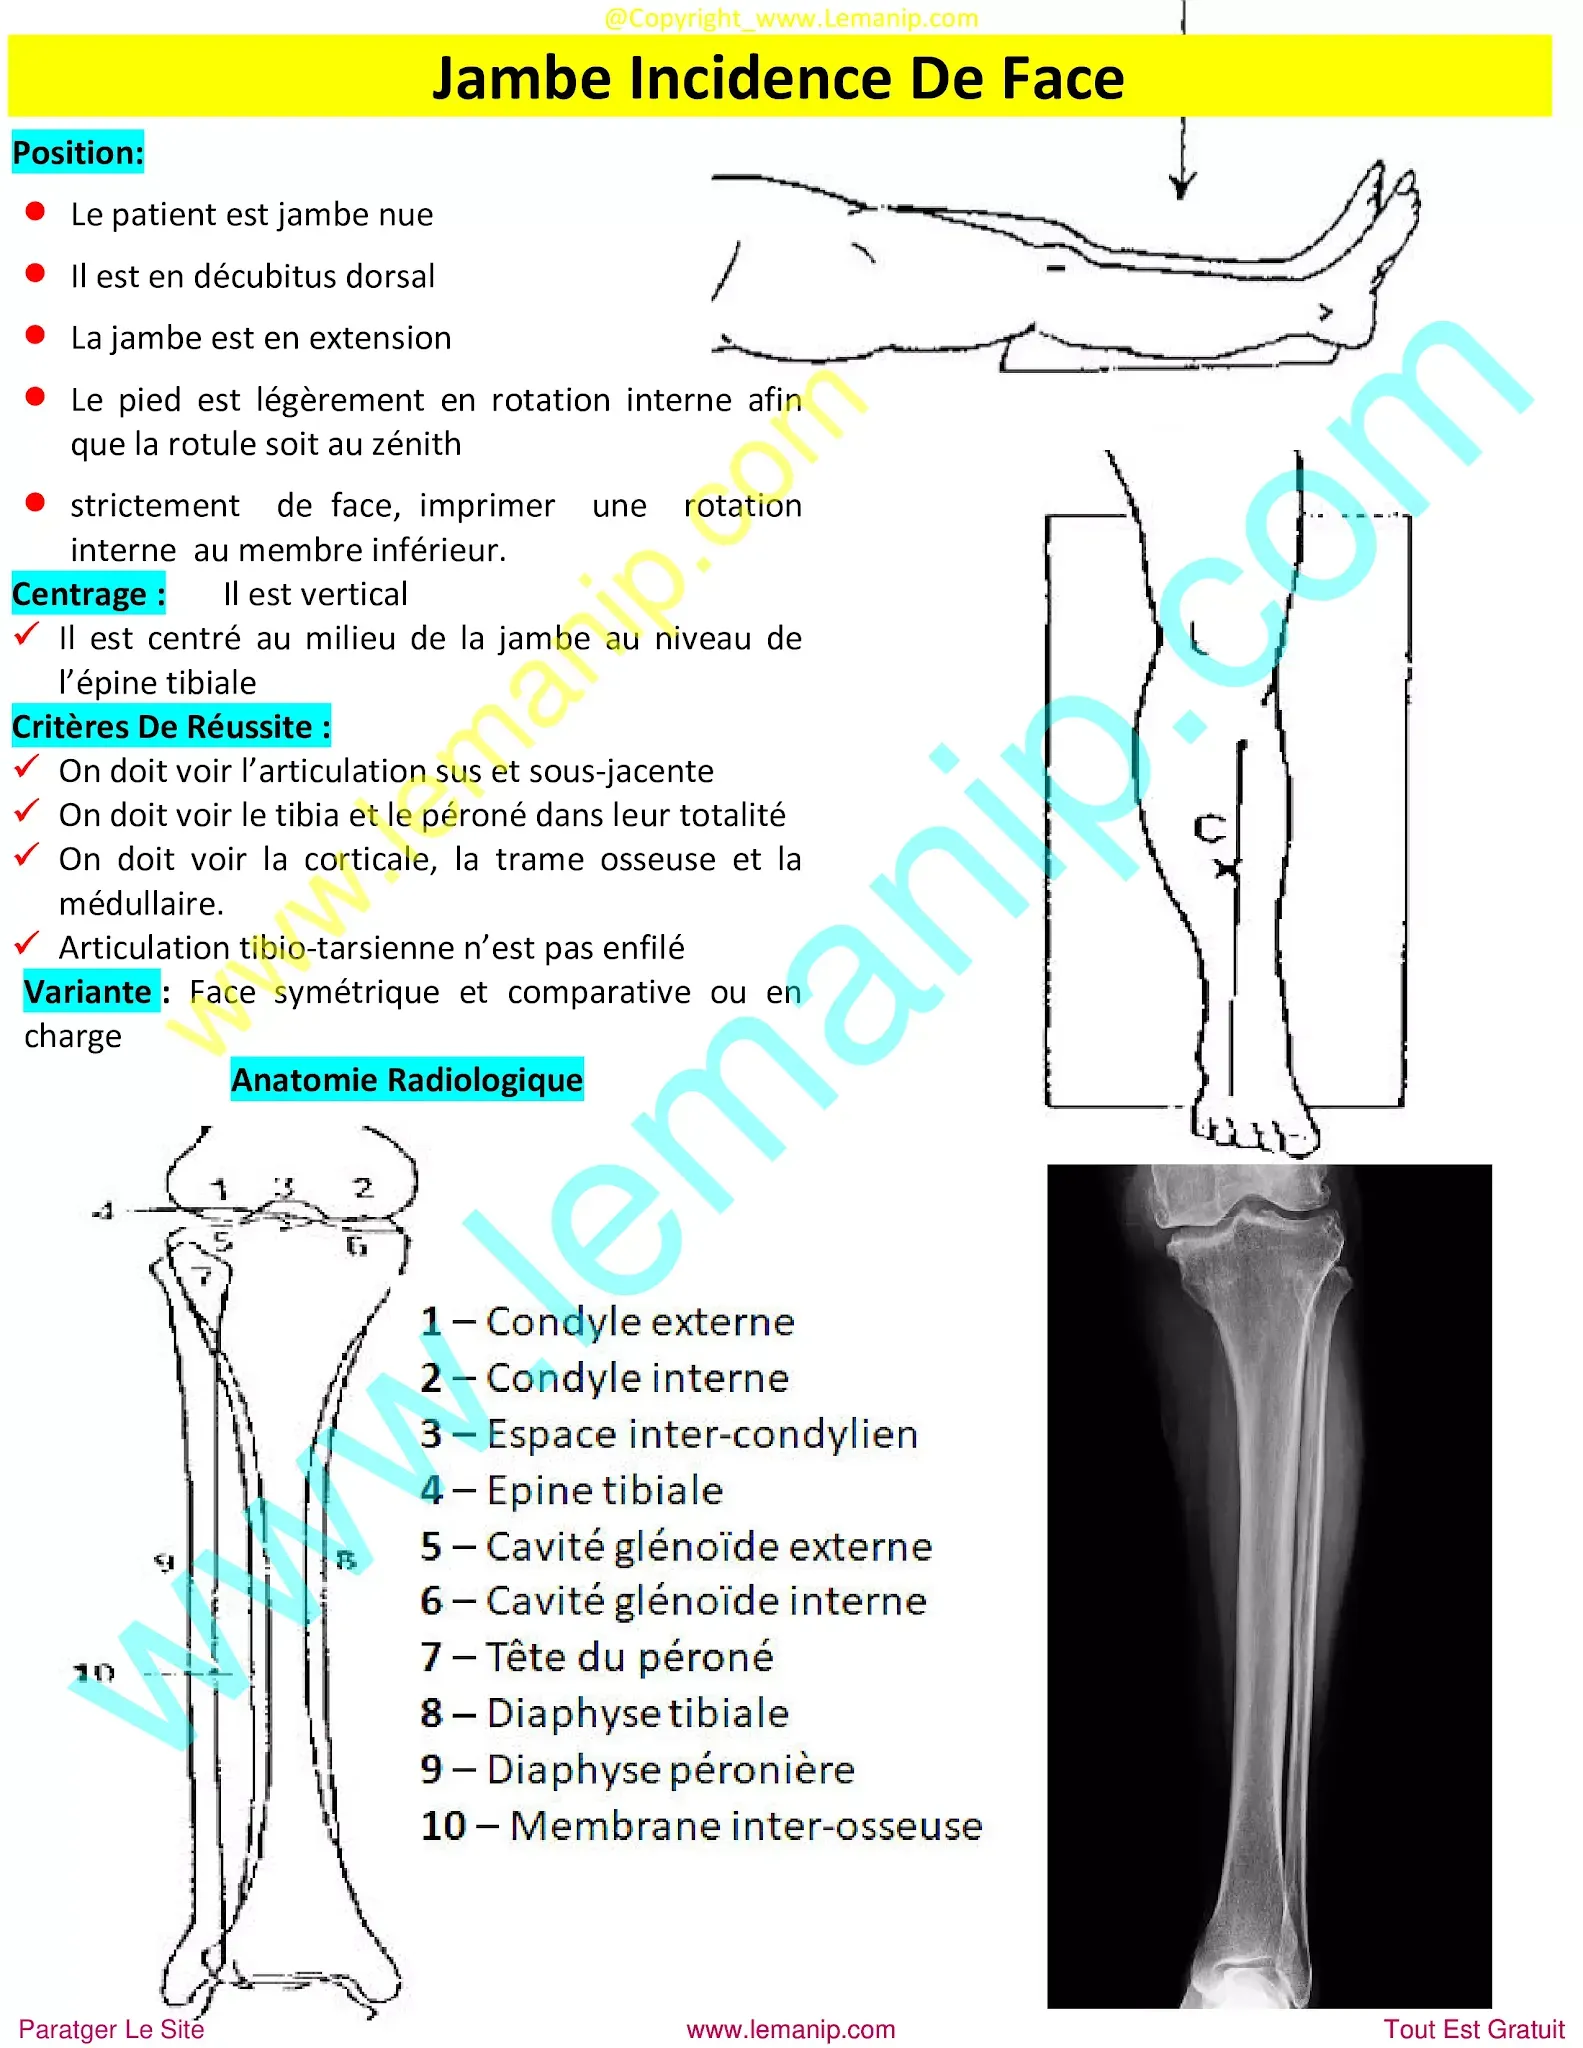 ankle xray,foot xray,broken foot x ray,fractured foot x ray,x ray of plantar fasciitis,twisted ankle xray,fracture x ray foot,ankle injury x ray,plantar x ray,broken foot xrays